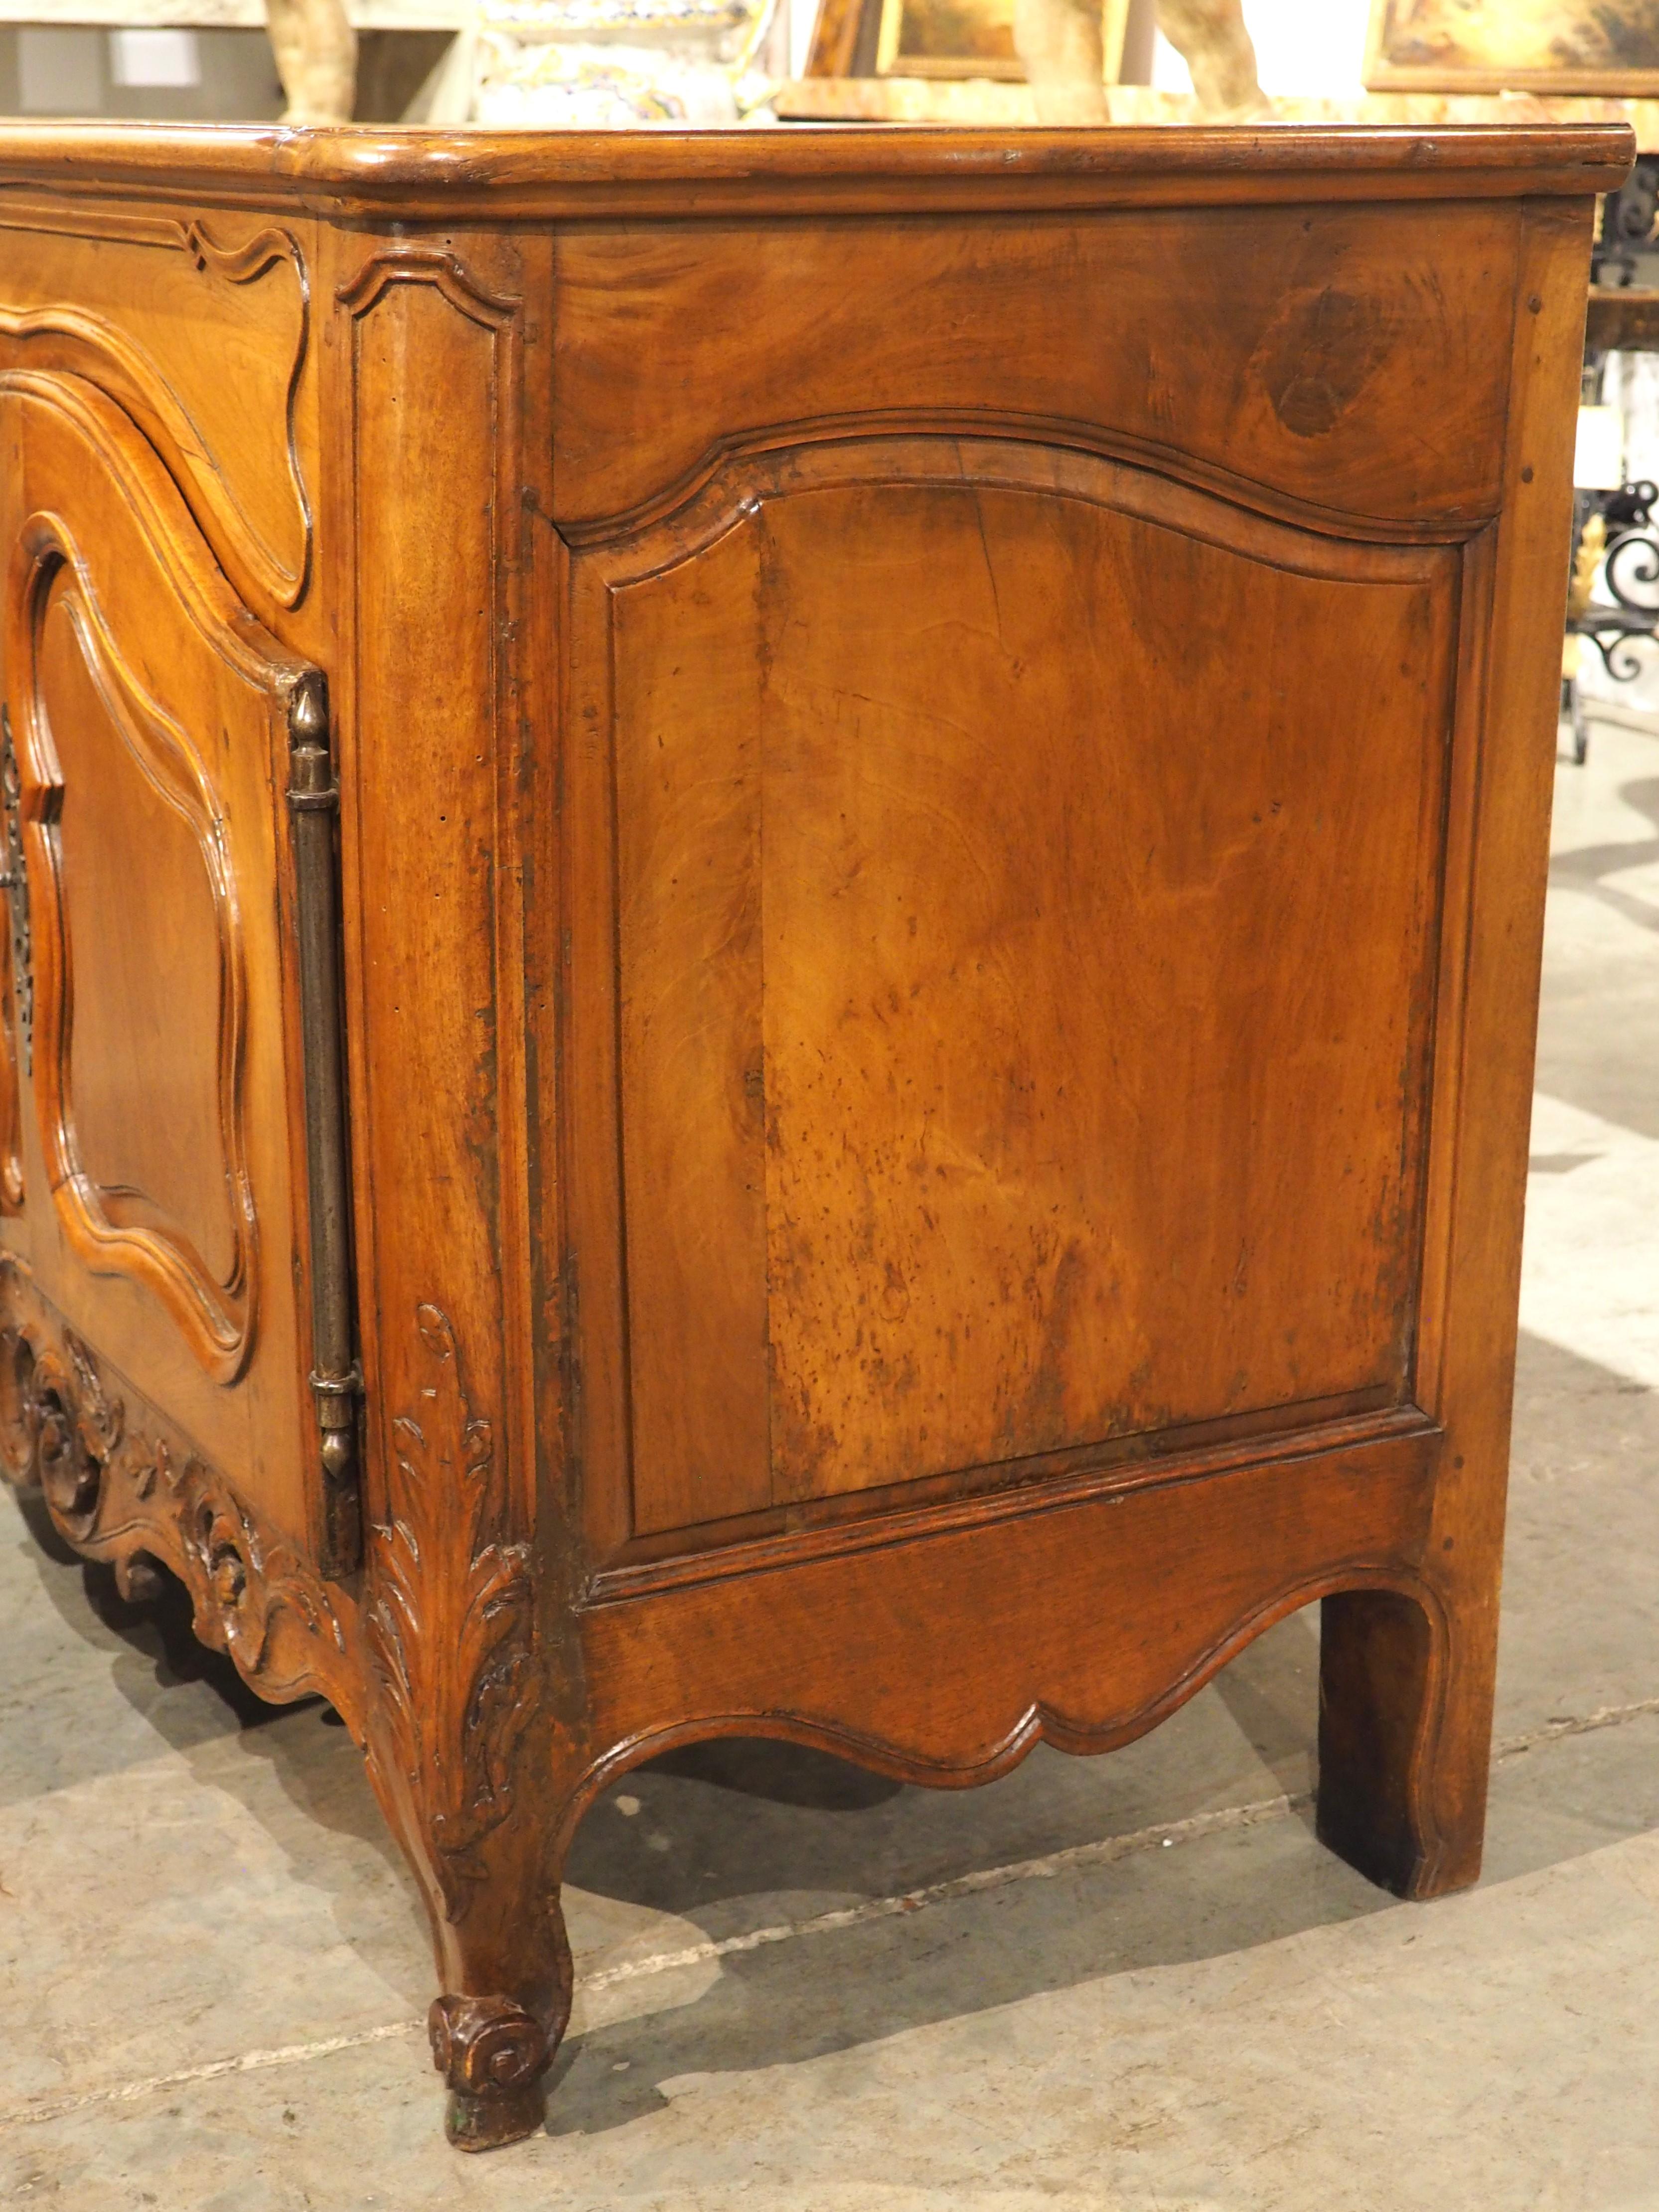 Circa 1750 Carved Walnut Wood Buffet Crédence from Nîmes, France 7